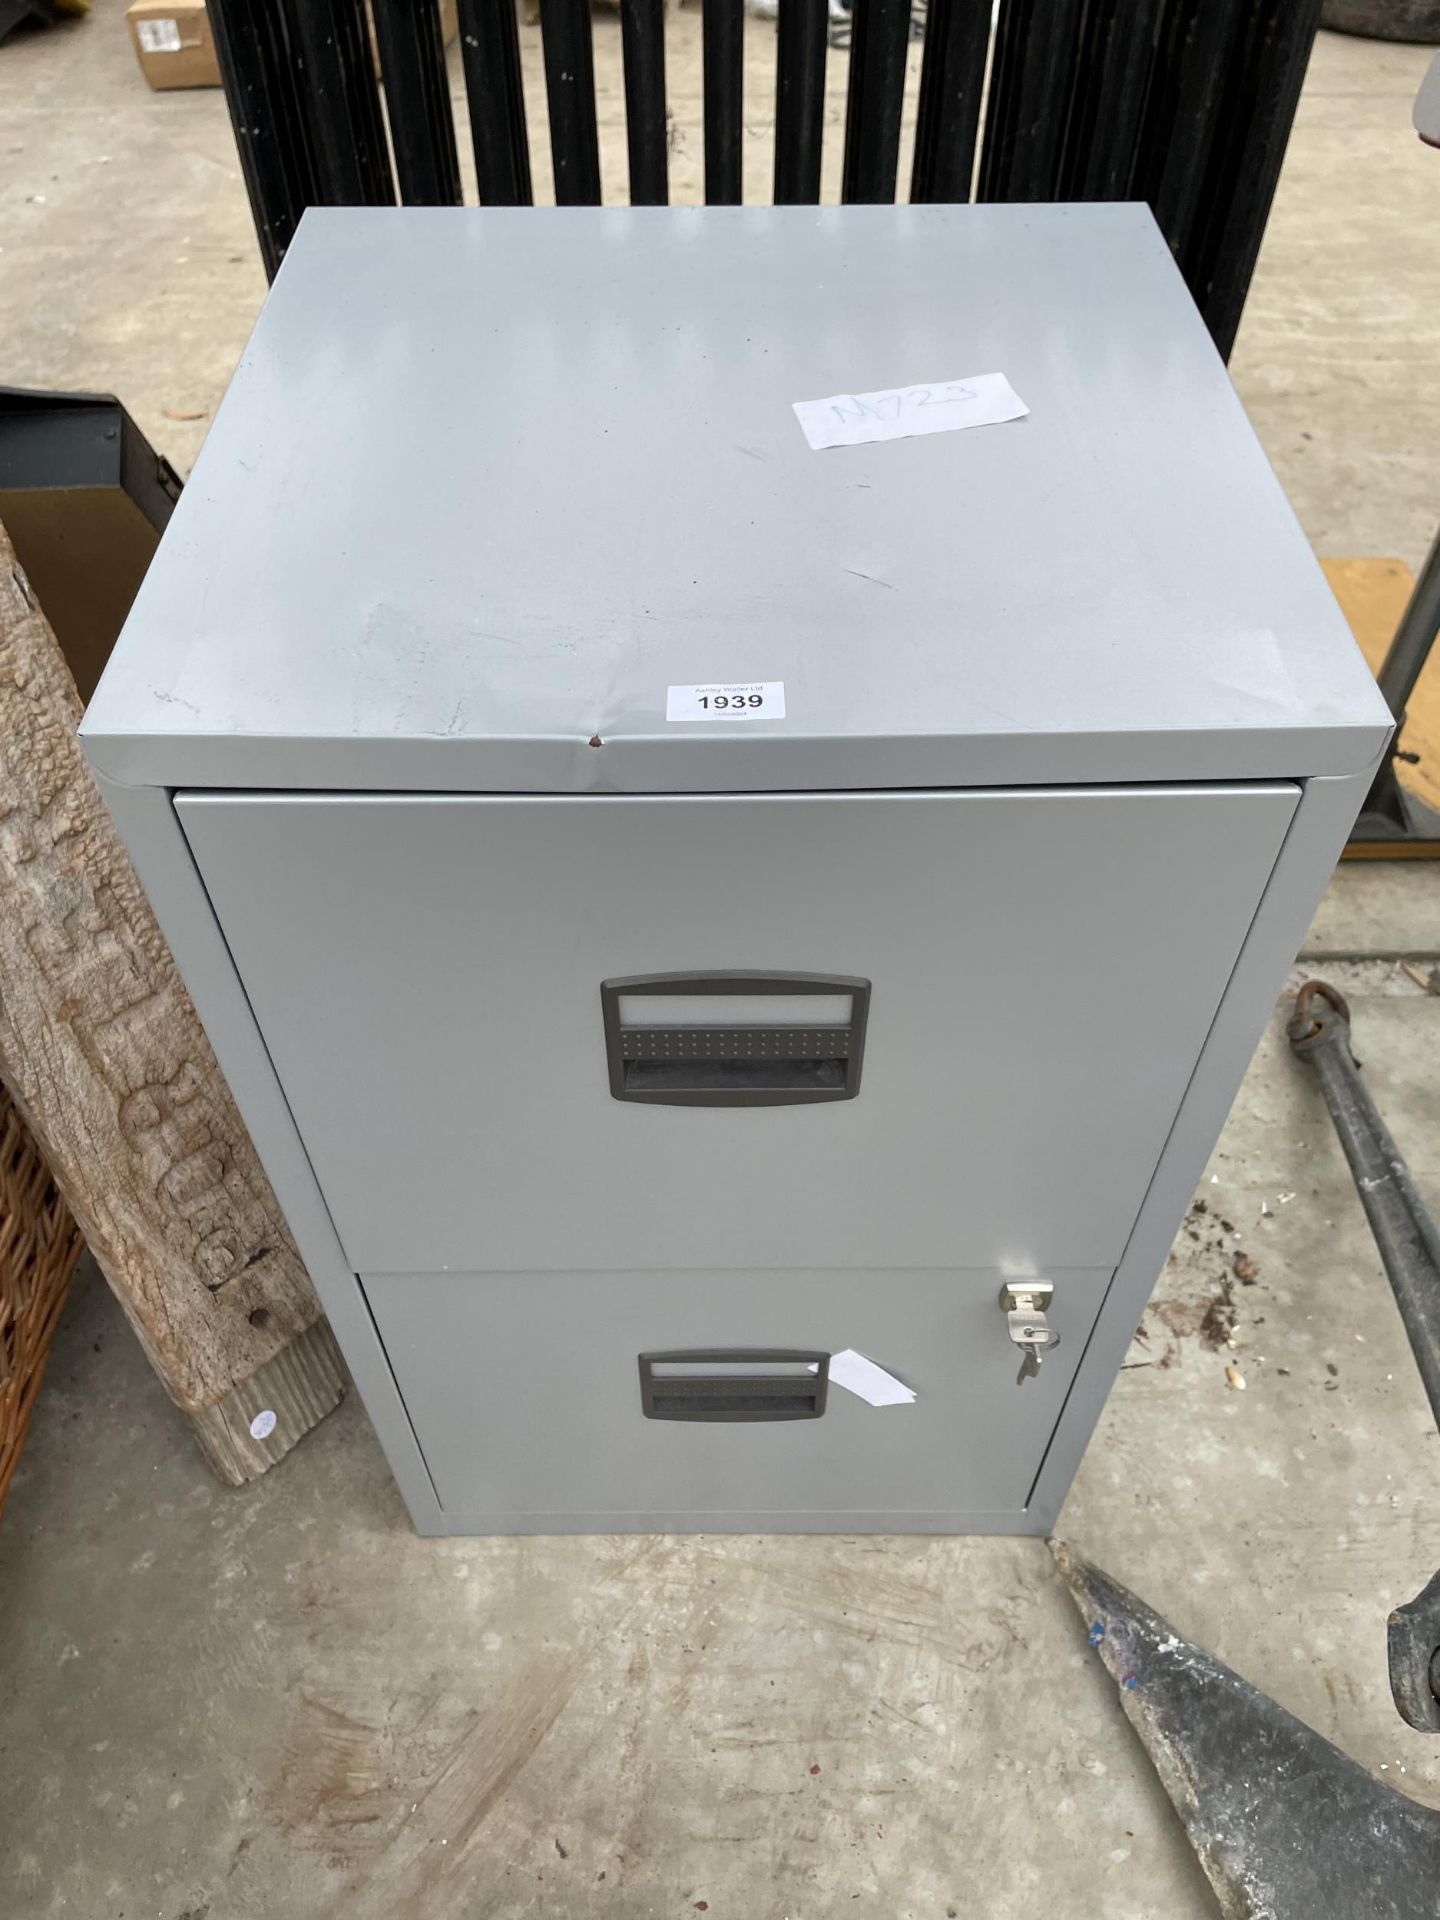 A METAL TWO DRAWER FILING CABINET